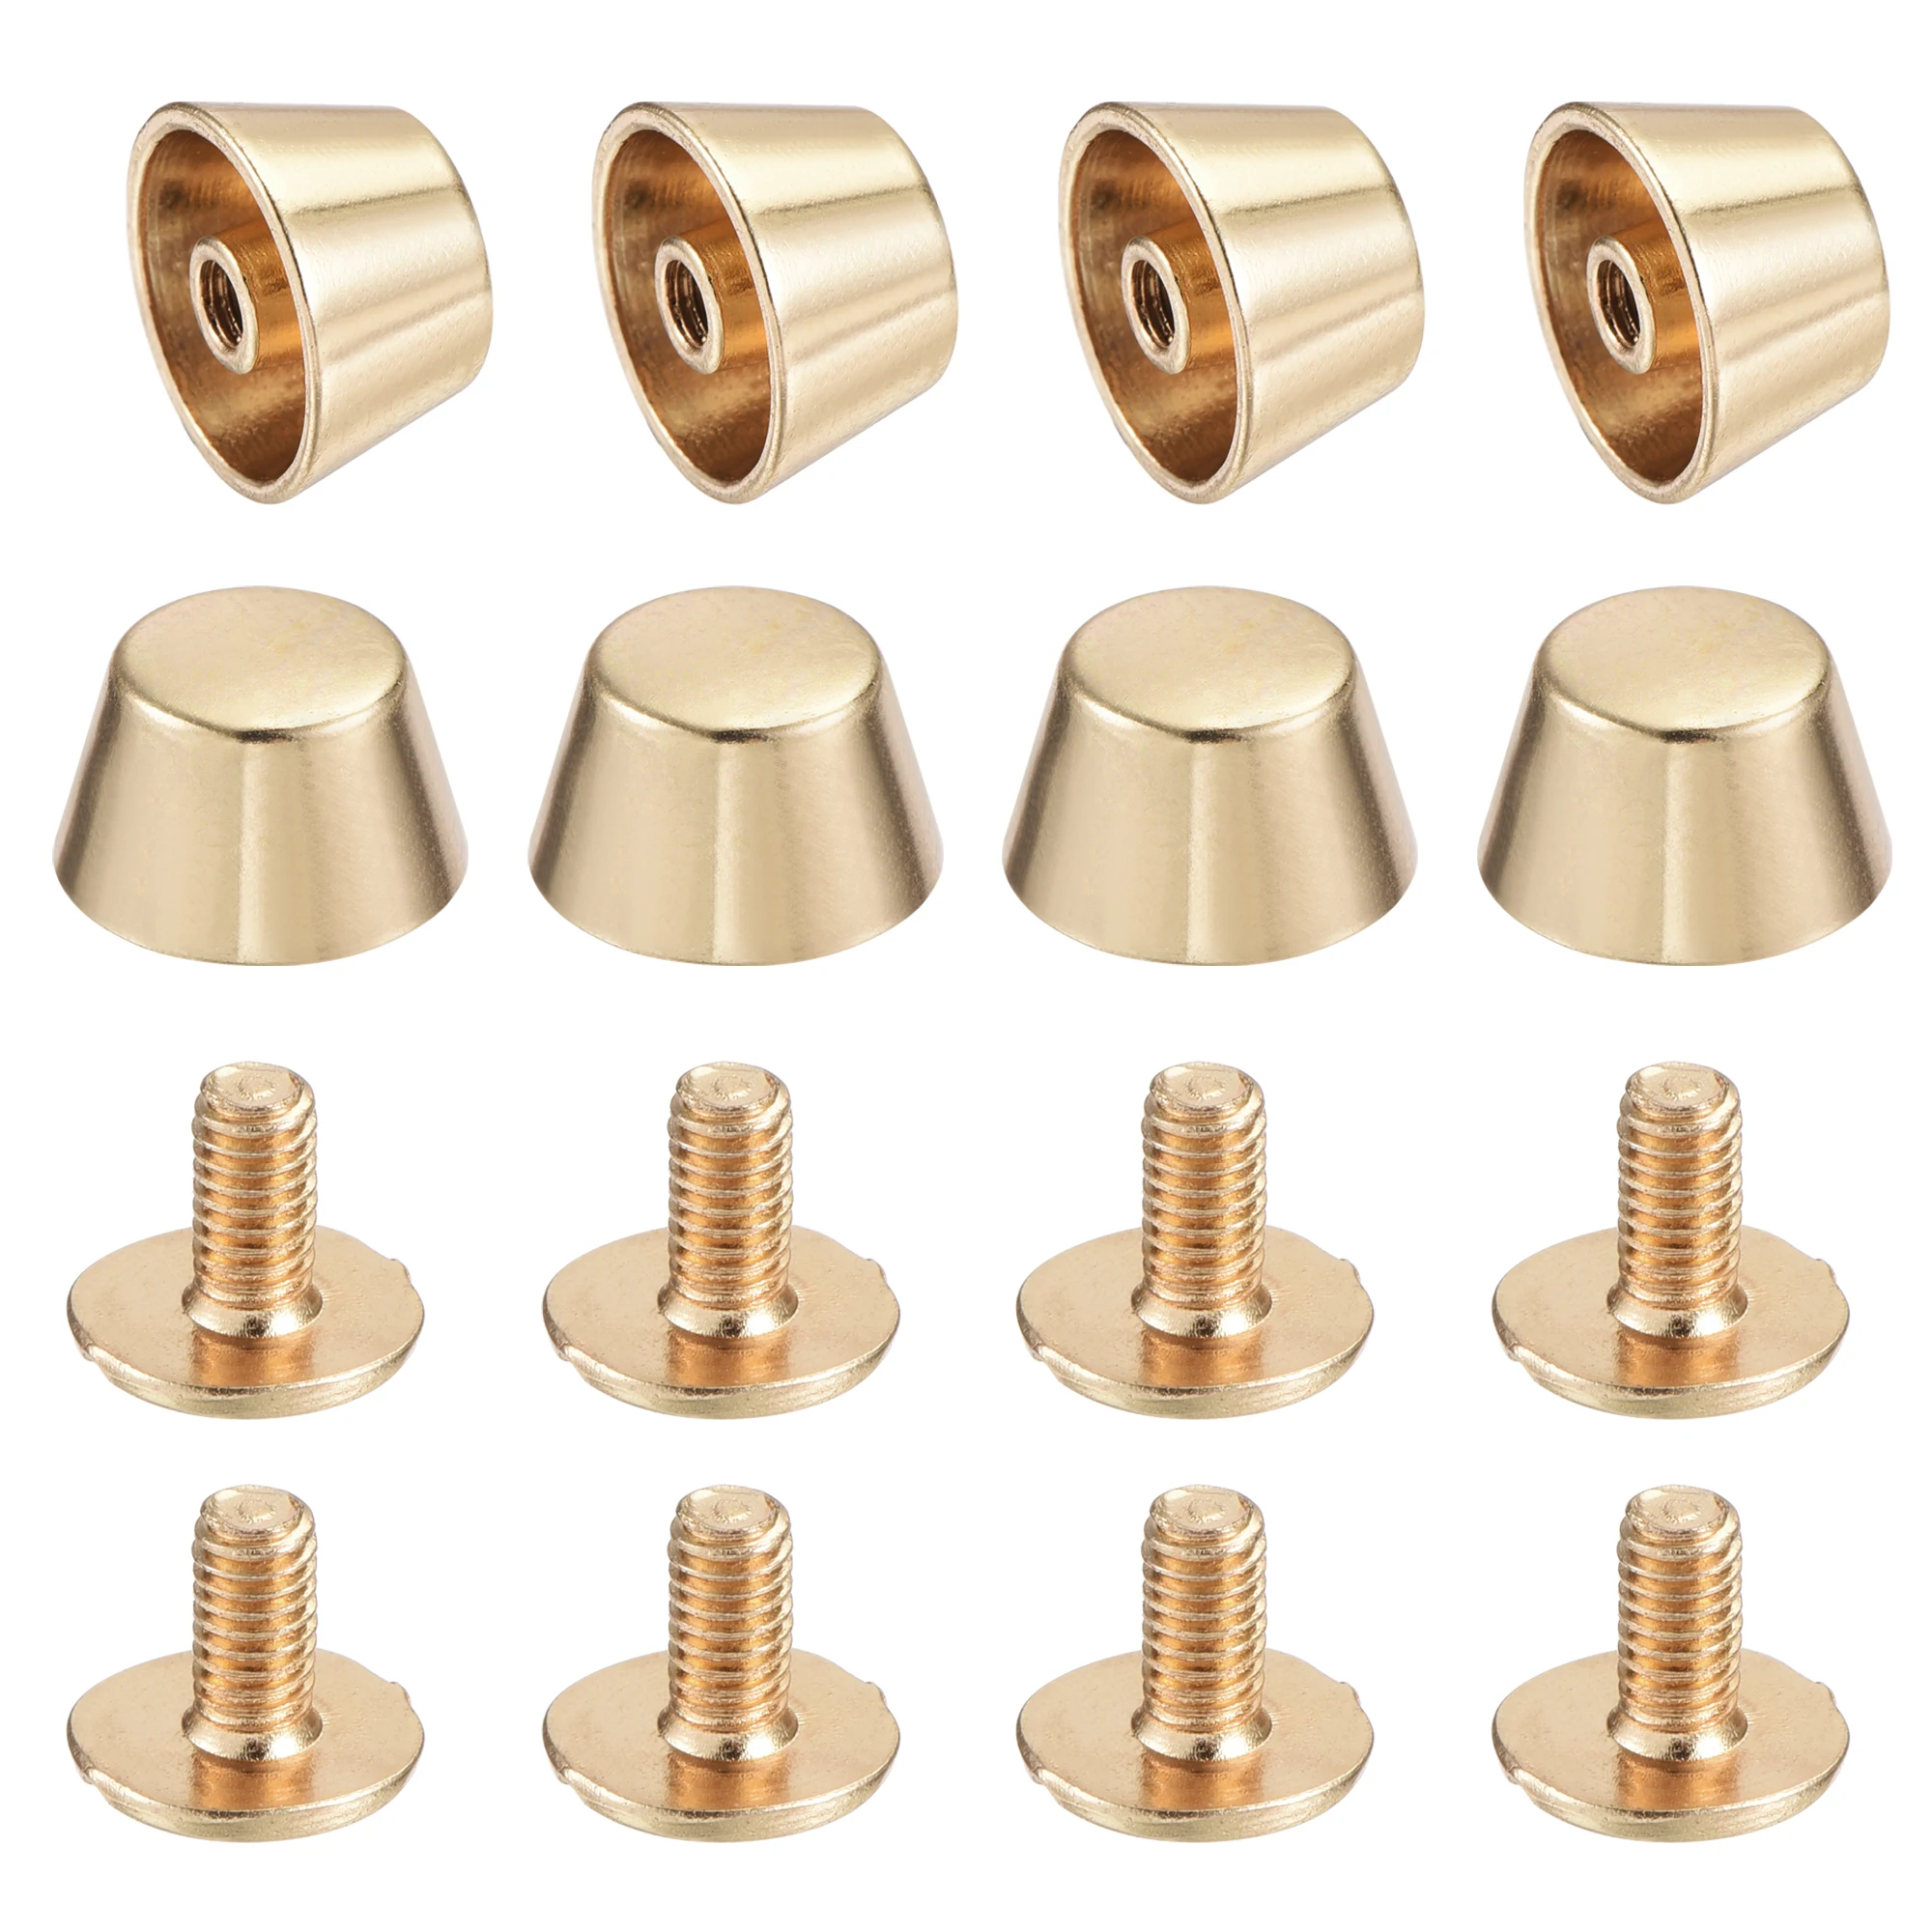 

Uxcell 8Pcs 12x7mm Rivet Studs Screw Back Flat Hollow Feet Stud Spike for Leather Craft DIY Gold Tone